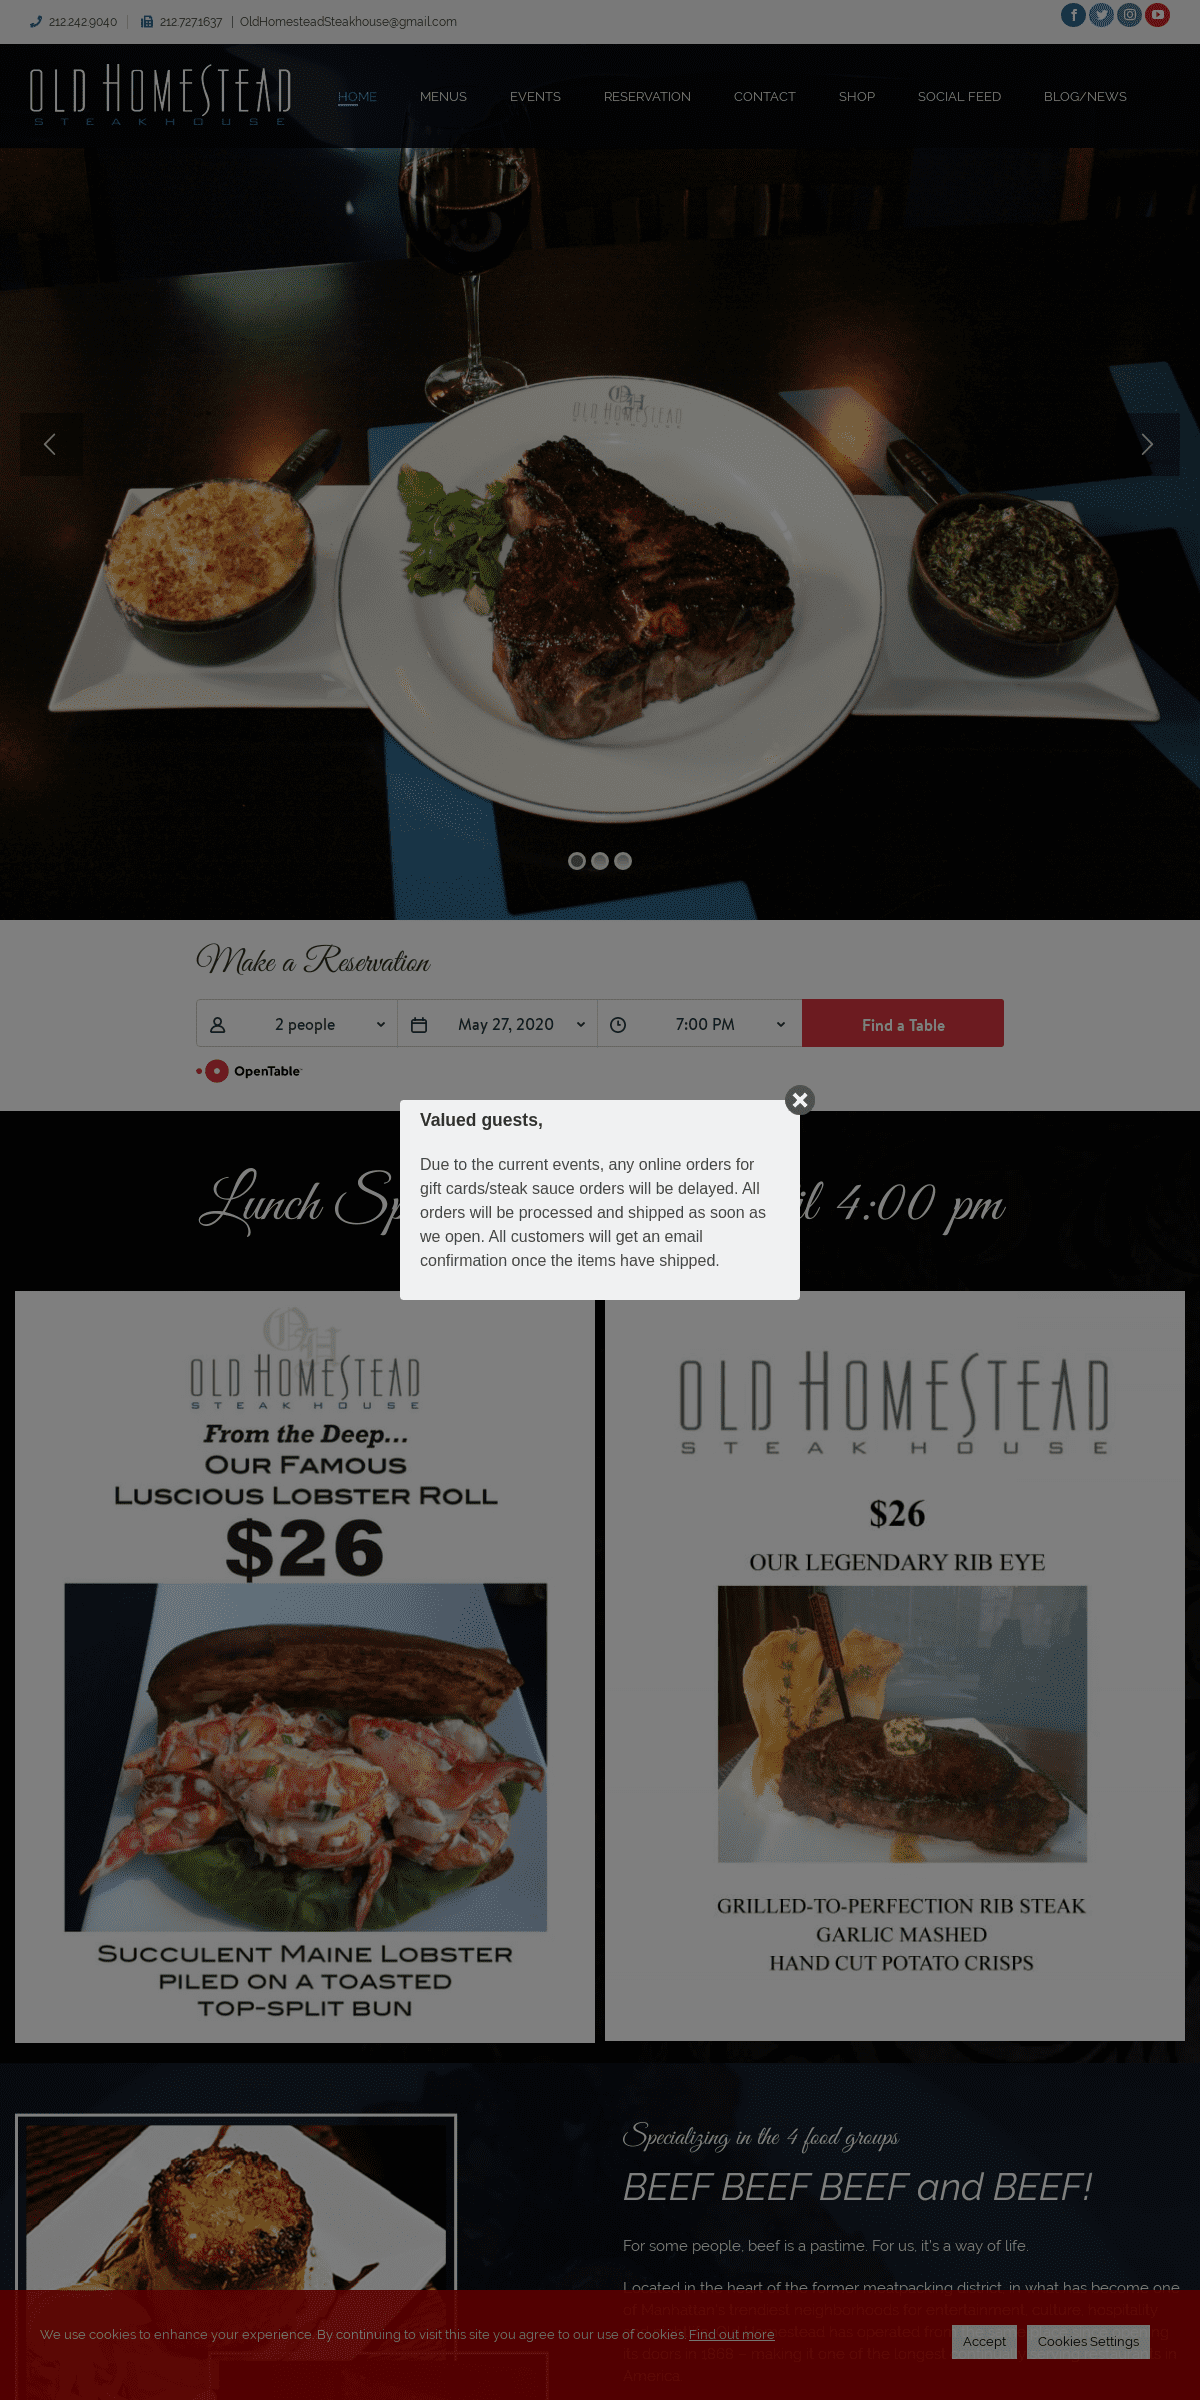 A complete backup of theoldhomesteadsteakhouse.com